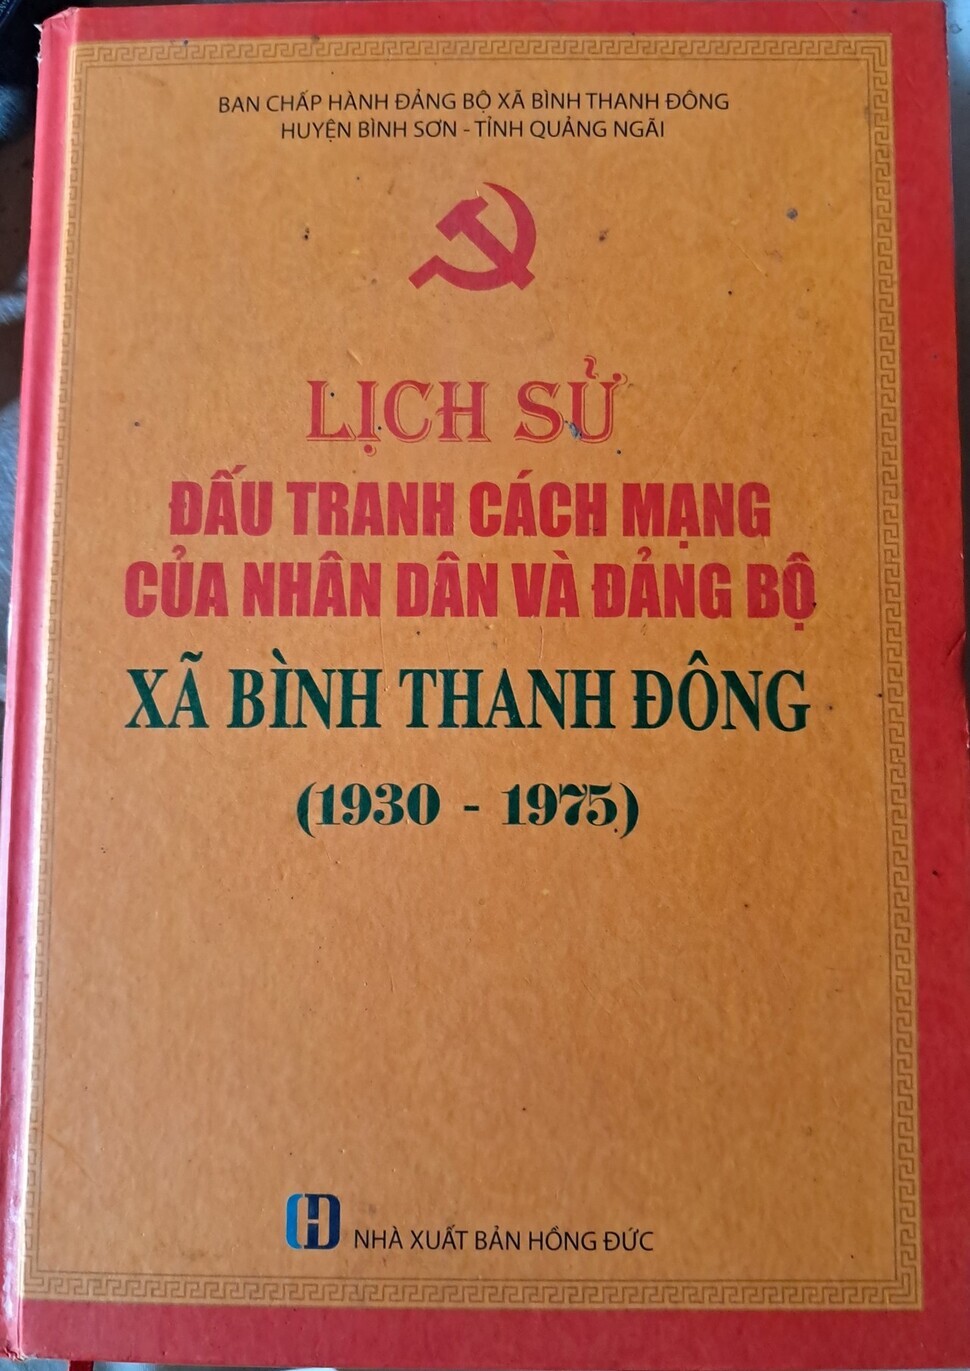 A book co-authored by Le Van Hien on the history of the party and the people of Bình Thanh.